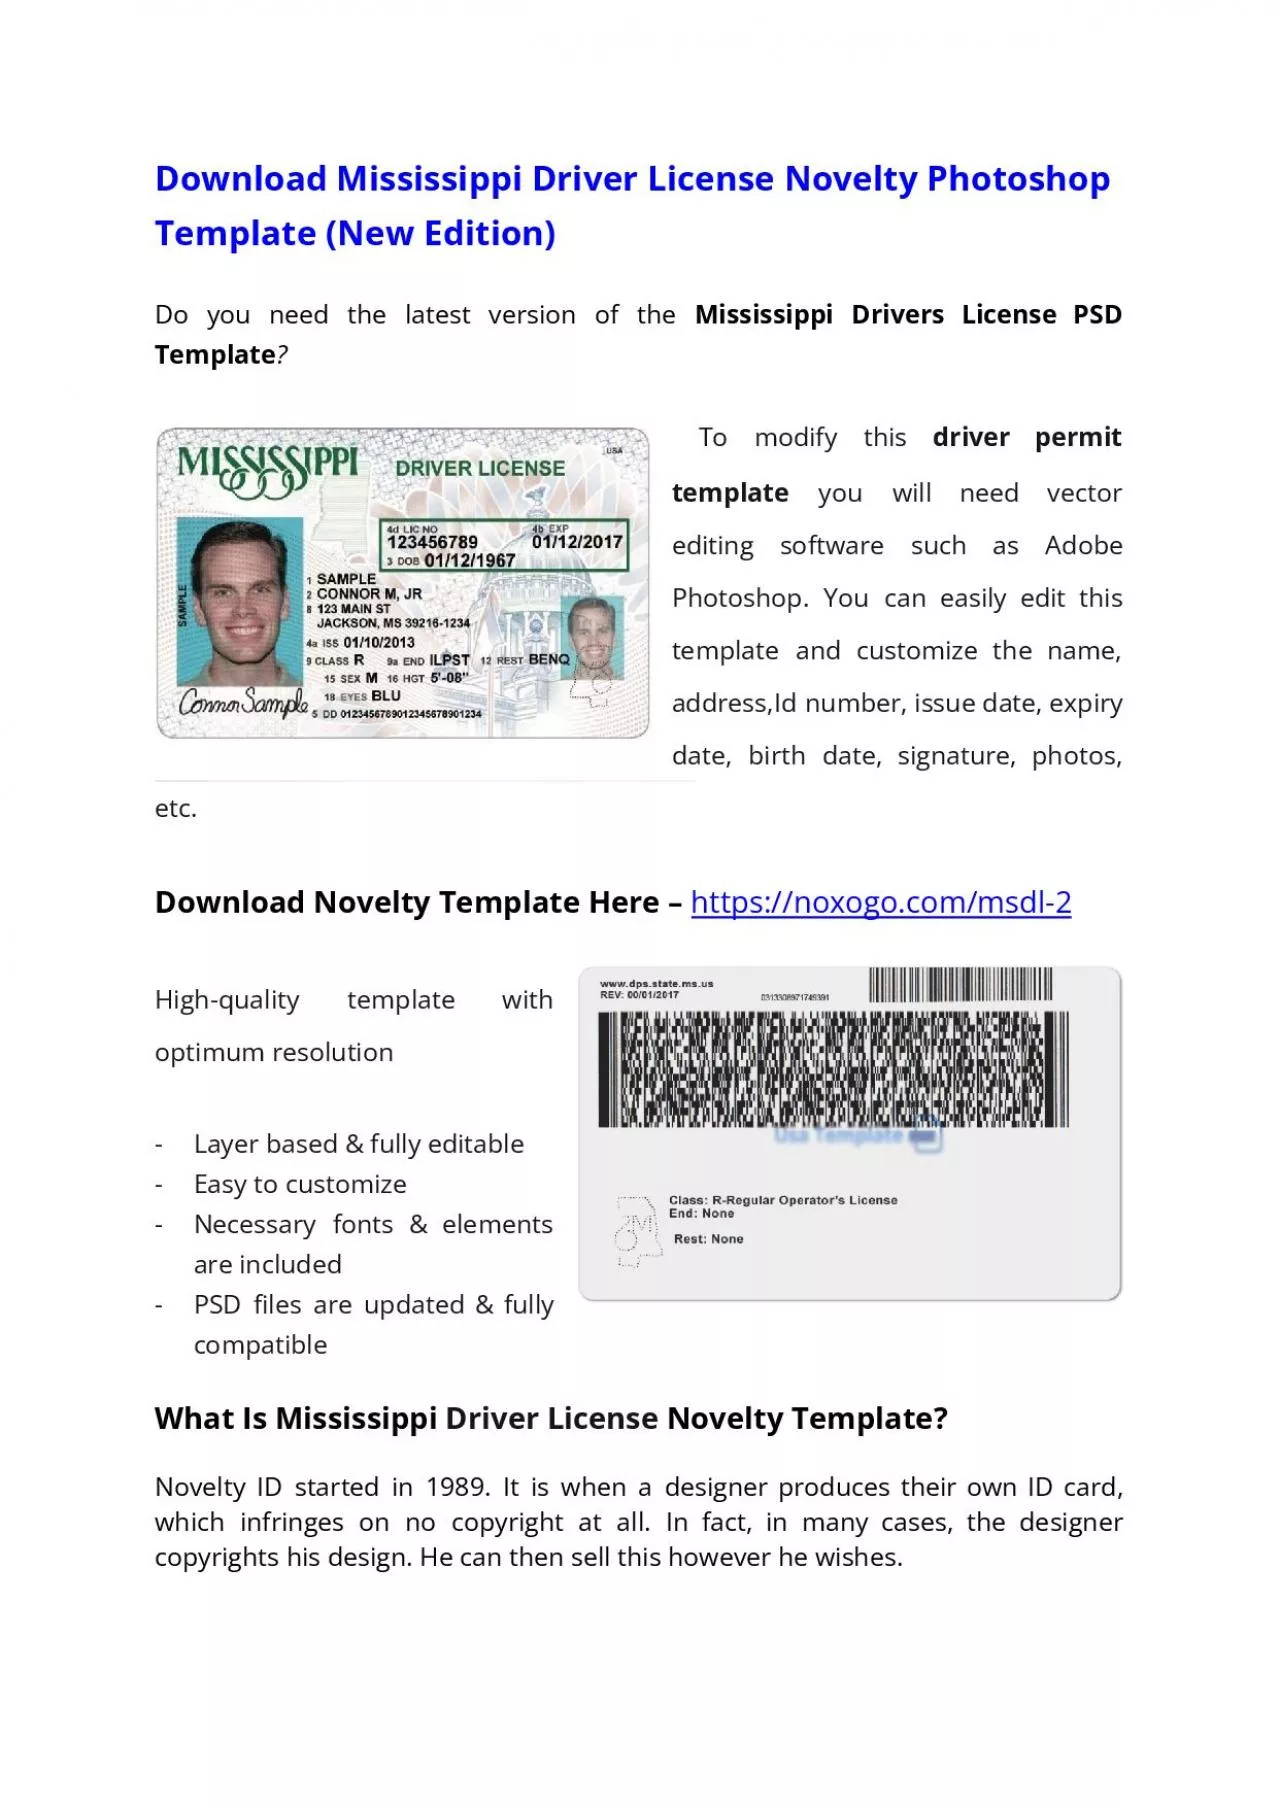 Mississippi Drivers License PSD Template (New Edition) – Download Photoshop File